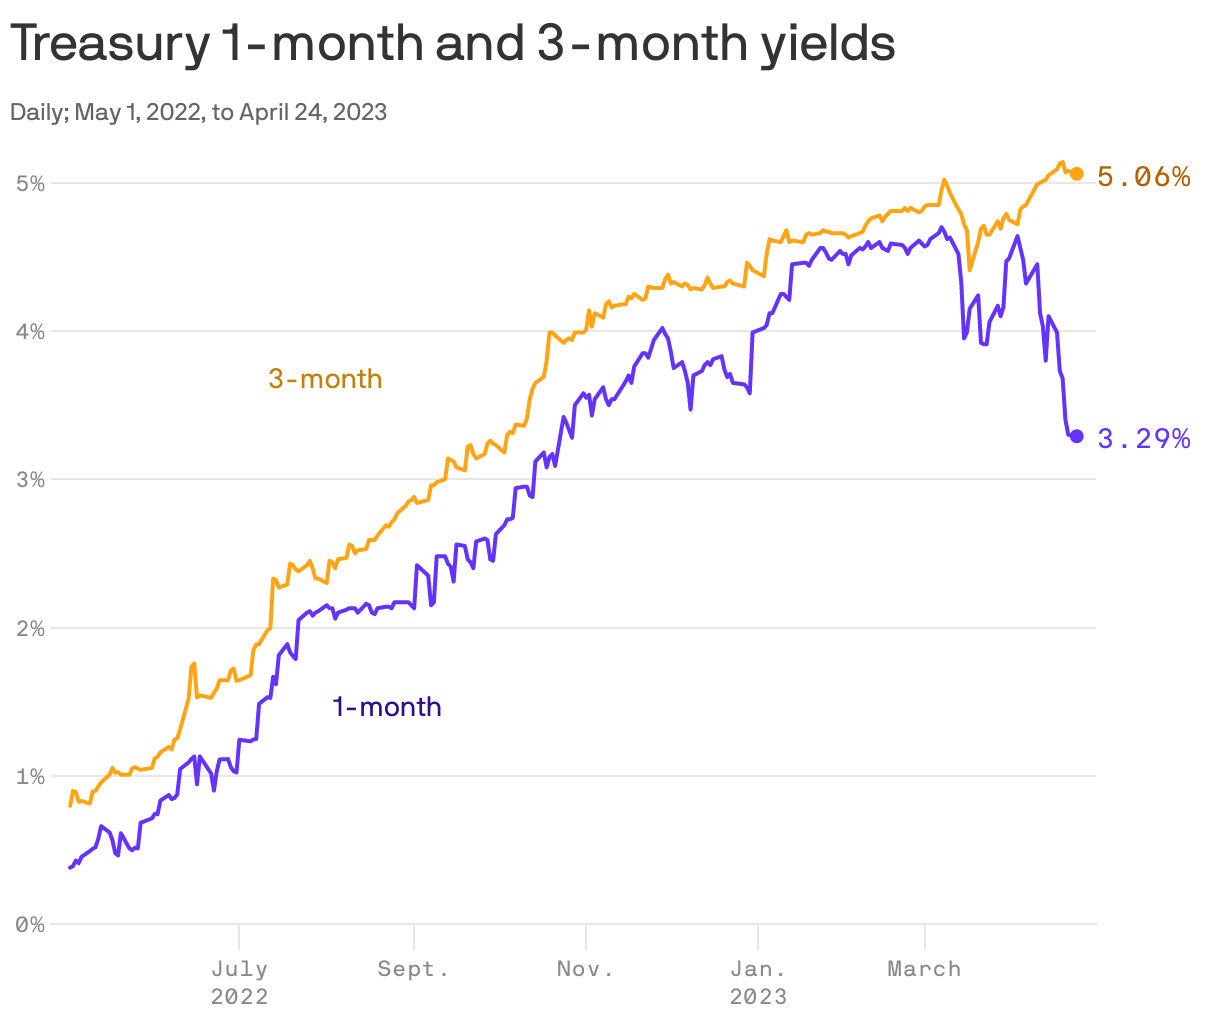 Treasury 1-month and 3-month yields